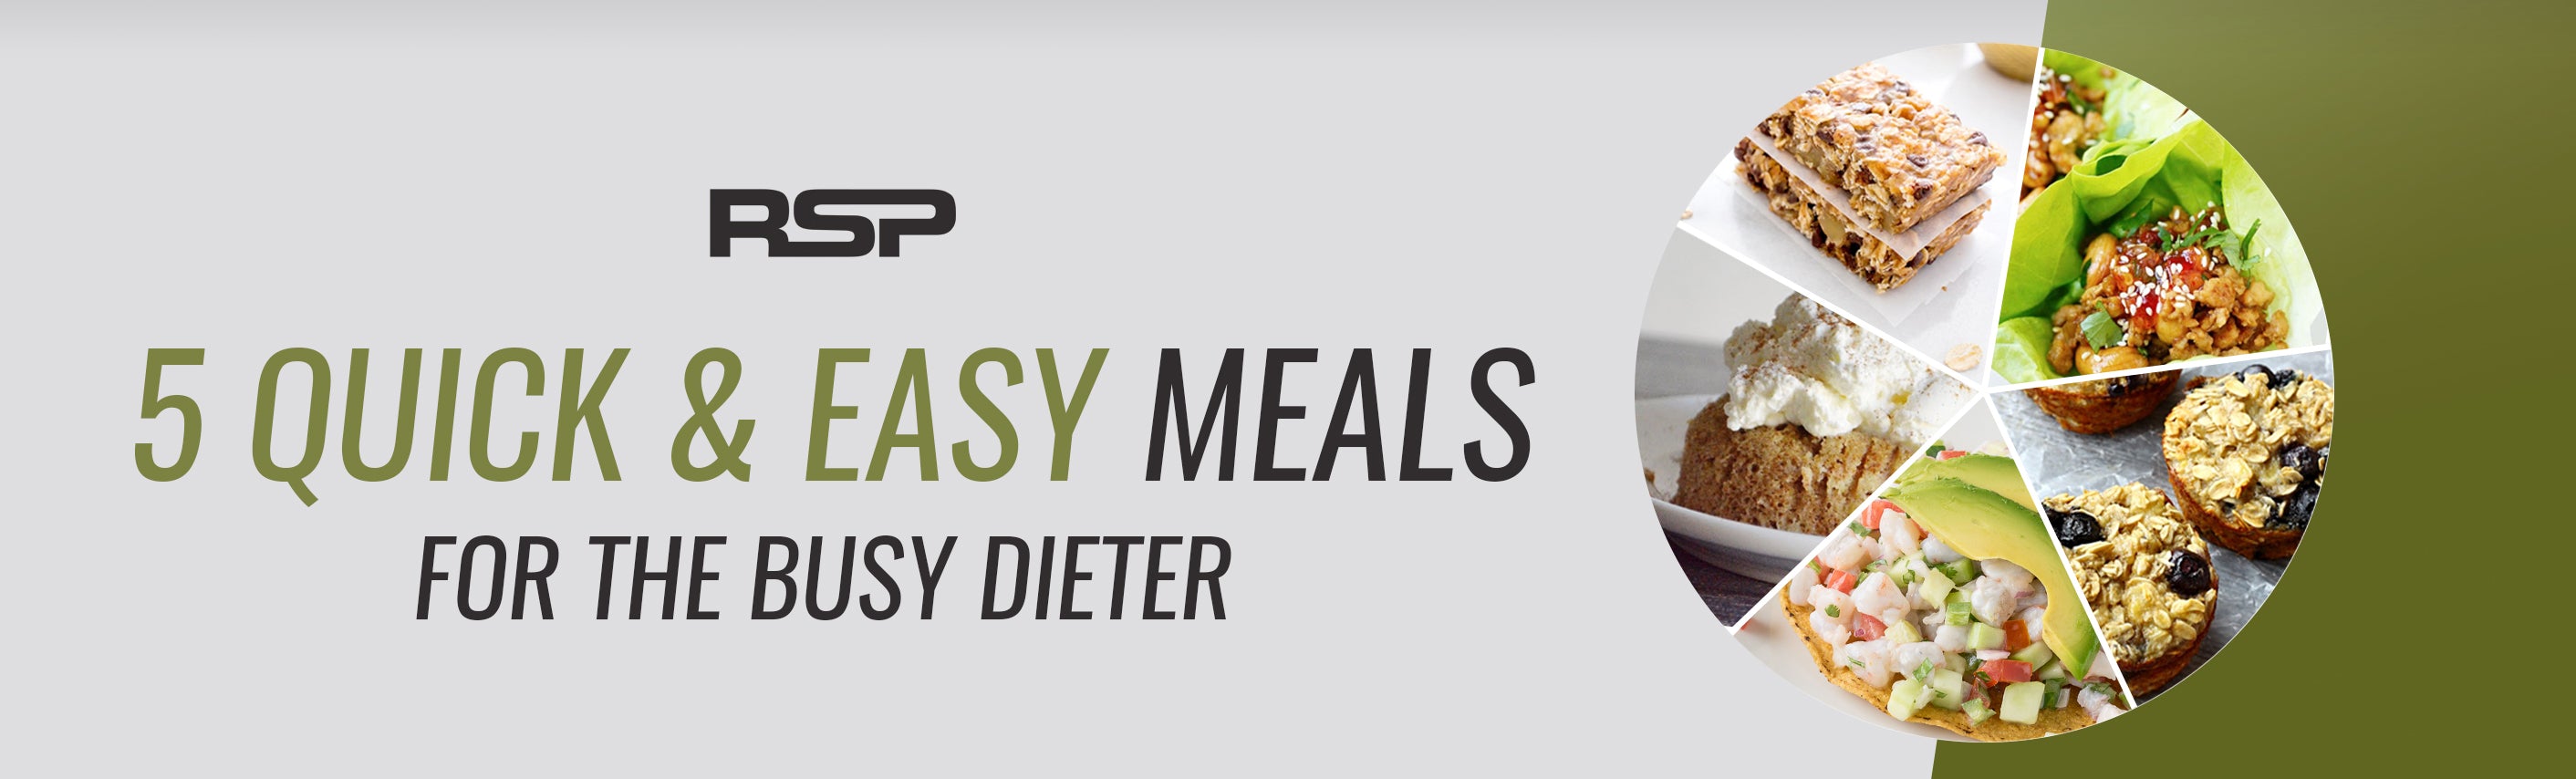 Five quick and easy healthy meals for the busy dieter